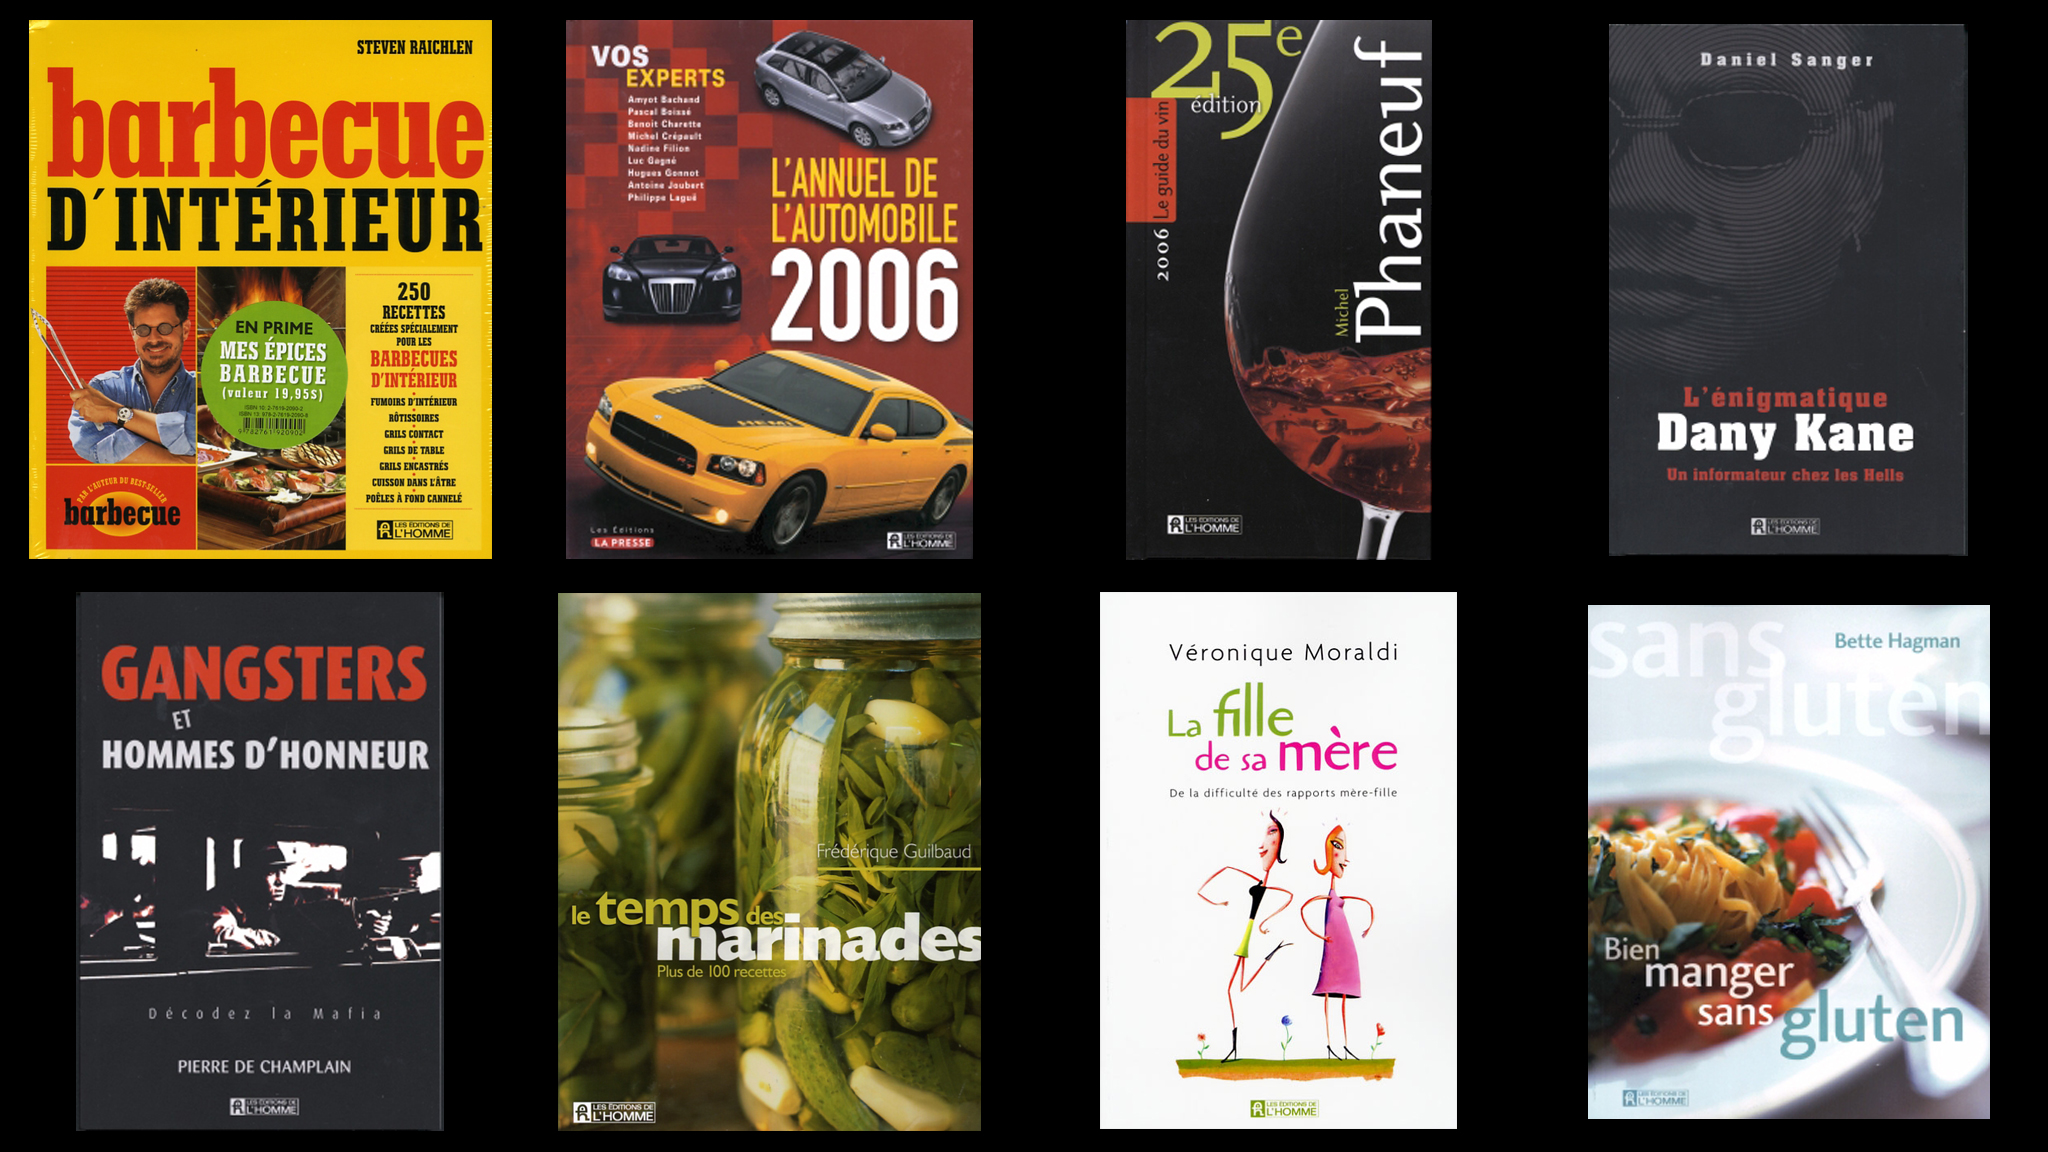 2005 - Quebecor Media acquires Sogides and becomes the largest publisher of French-language books in Canada.